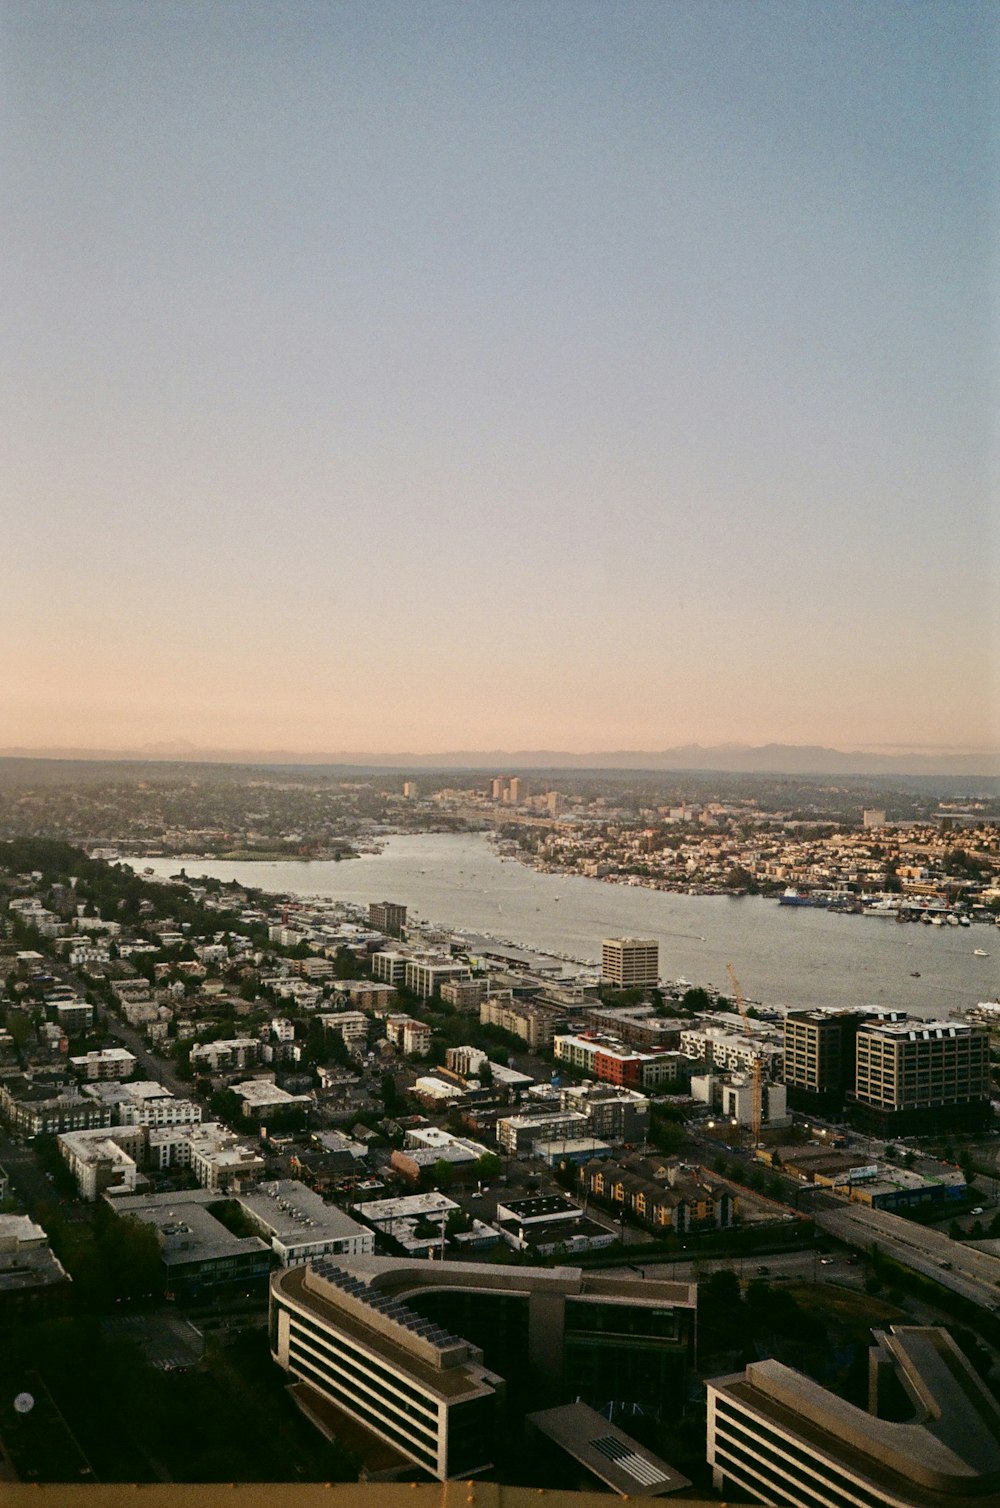 an aerial view of a city and a body of water